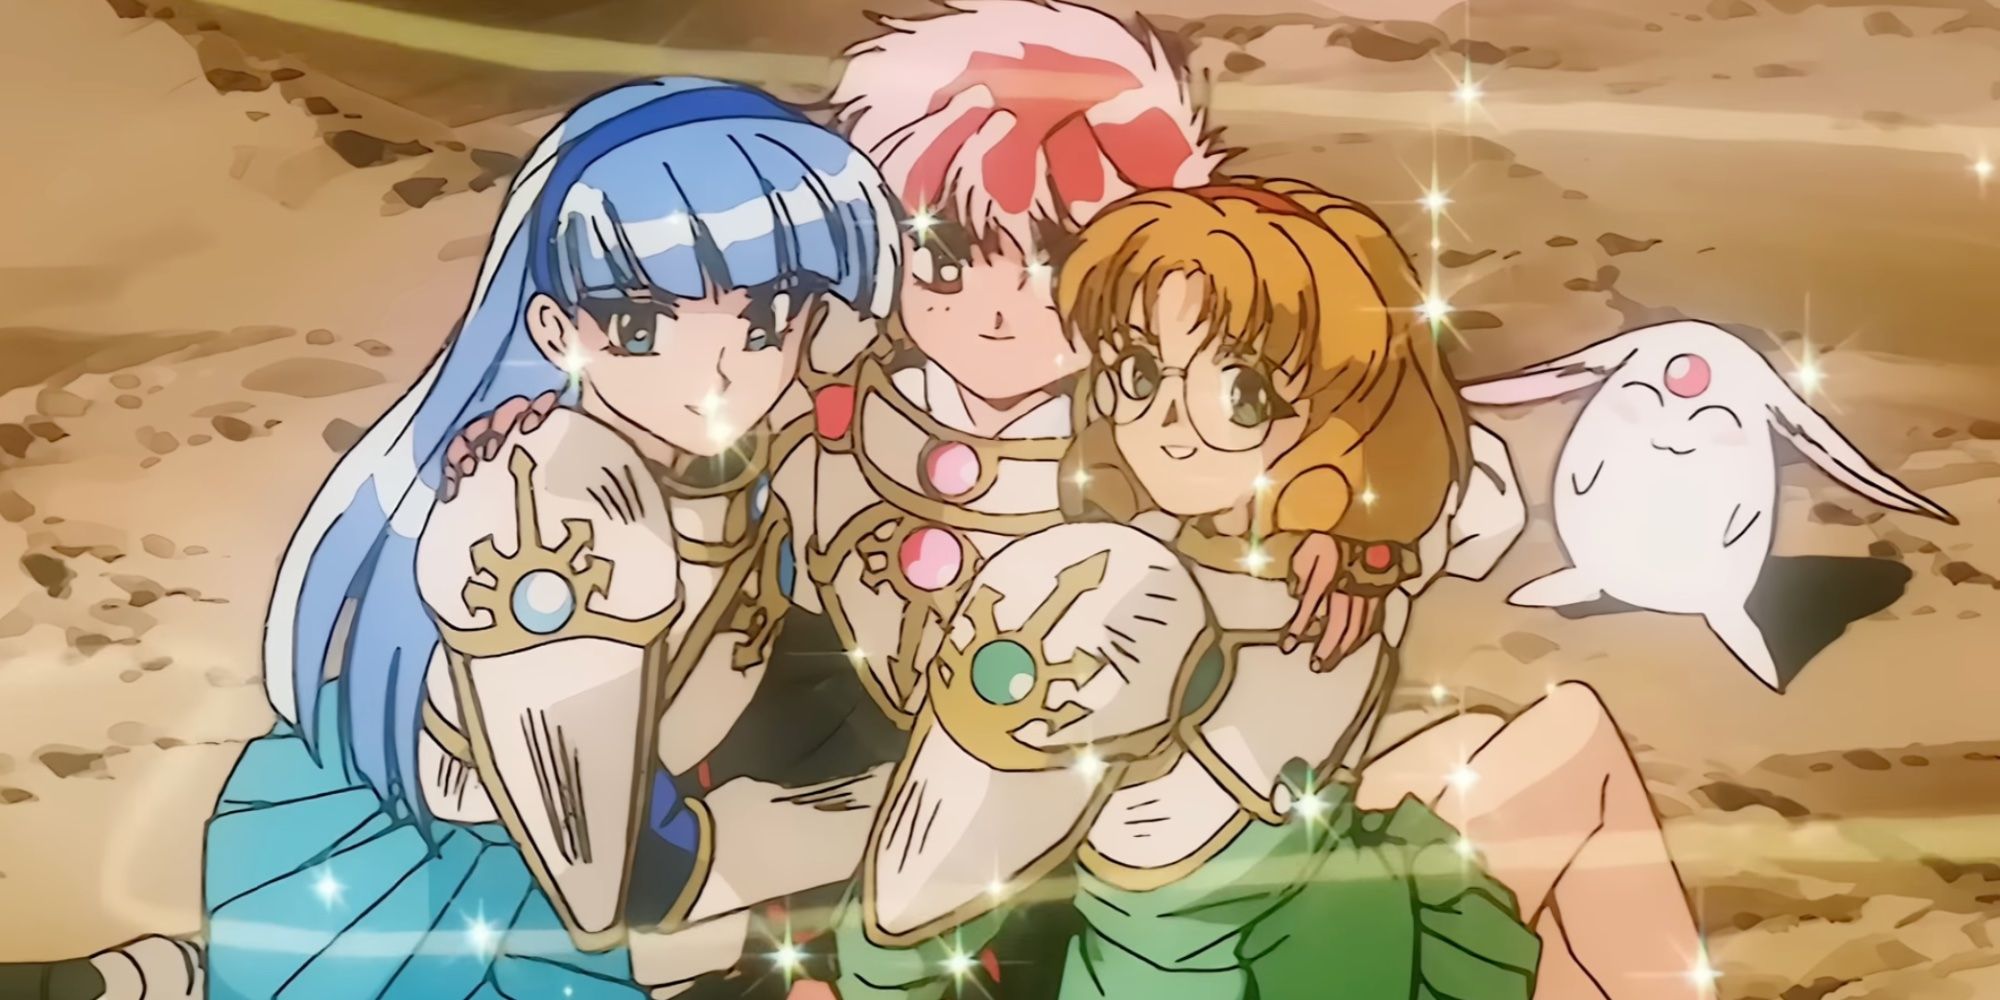 Magic Knight Rayearth: three girls wearing armors embracing each other